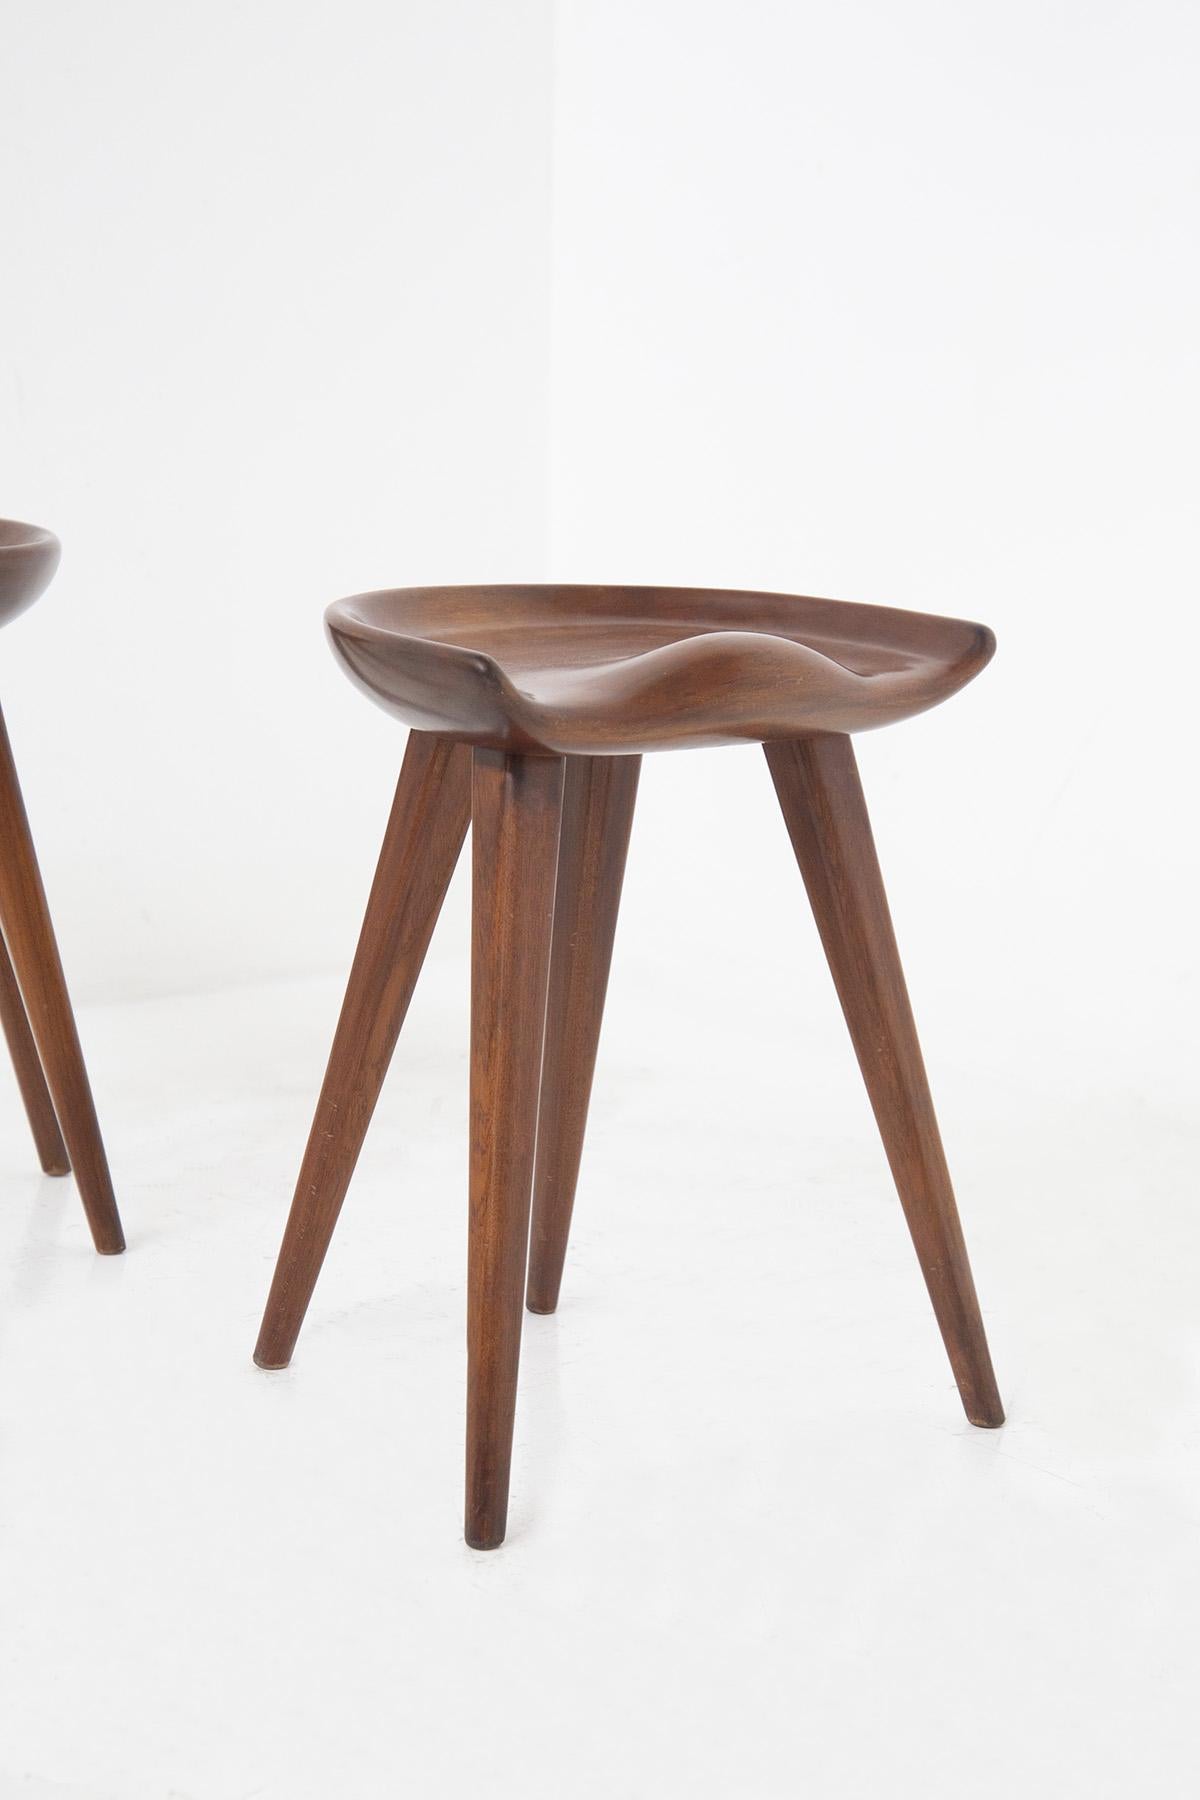 Mid-20th Century Mogens Lassen Pair of Carved Wooden Stools For Sale